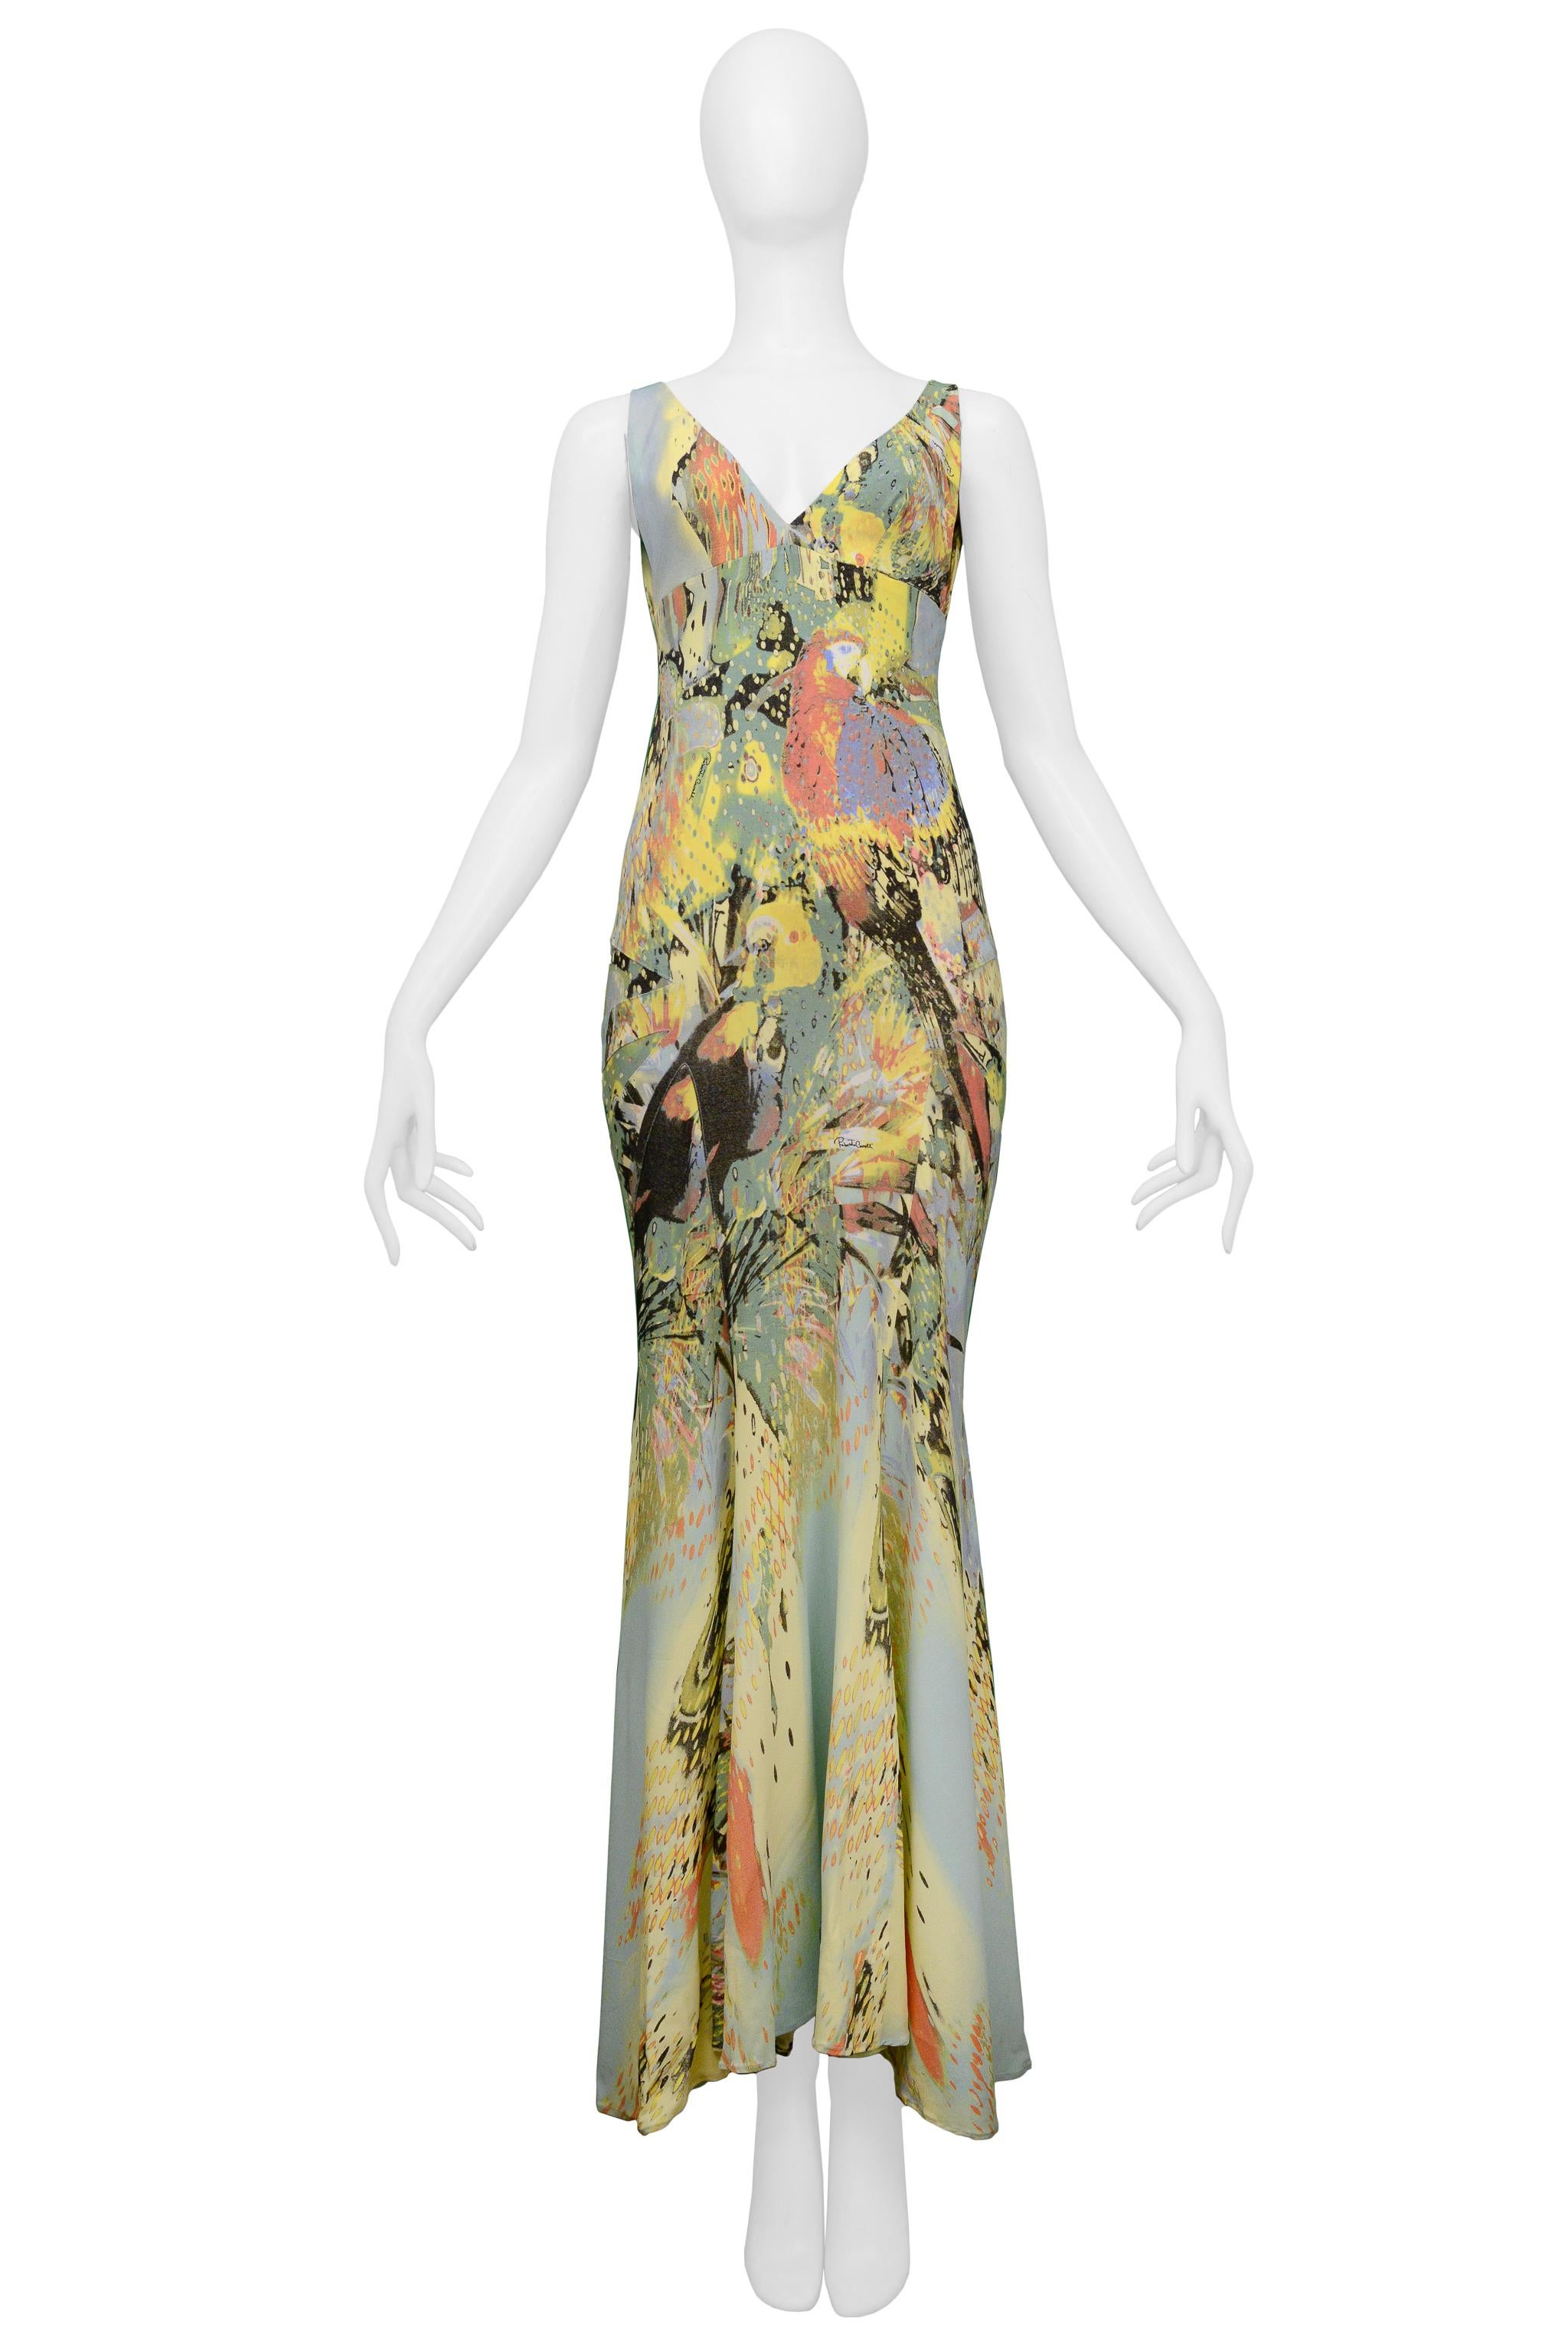 Resurrection Vintage is excited to present a vintage Roberto Cavalli yellow parrot print slip dress featuring thick straps, 1930's style slip dress bodice, decorative panels at the hips, three gold-tone hooks and eyes at center back that feature